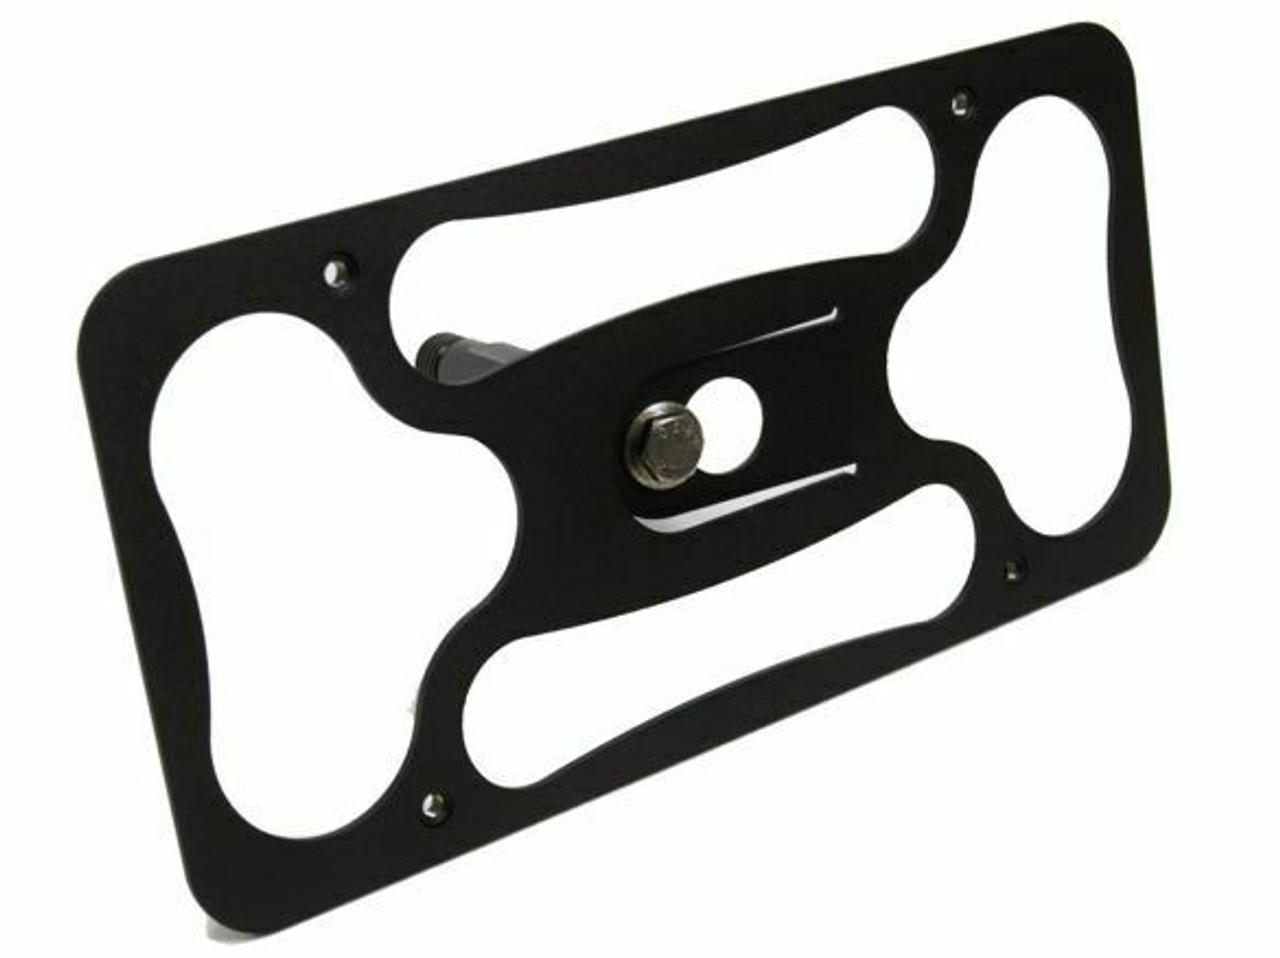 Tow hook front license plate holder?